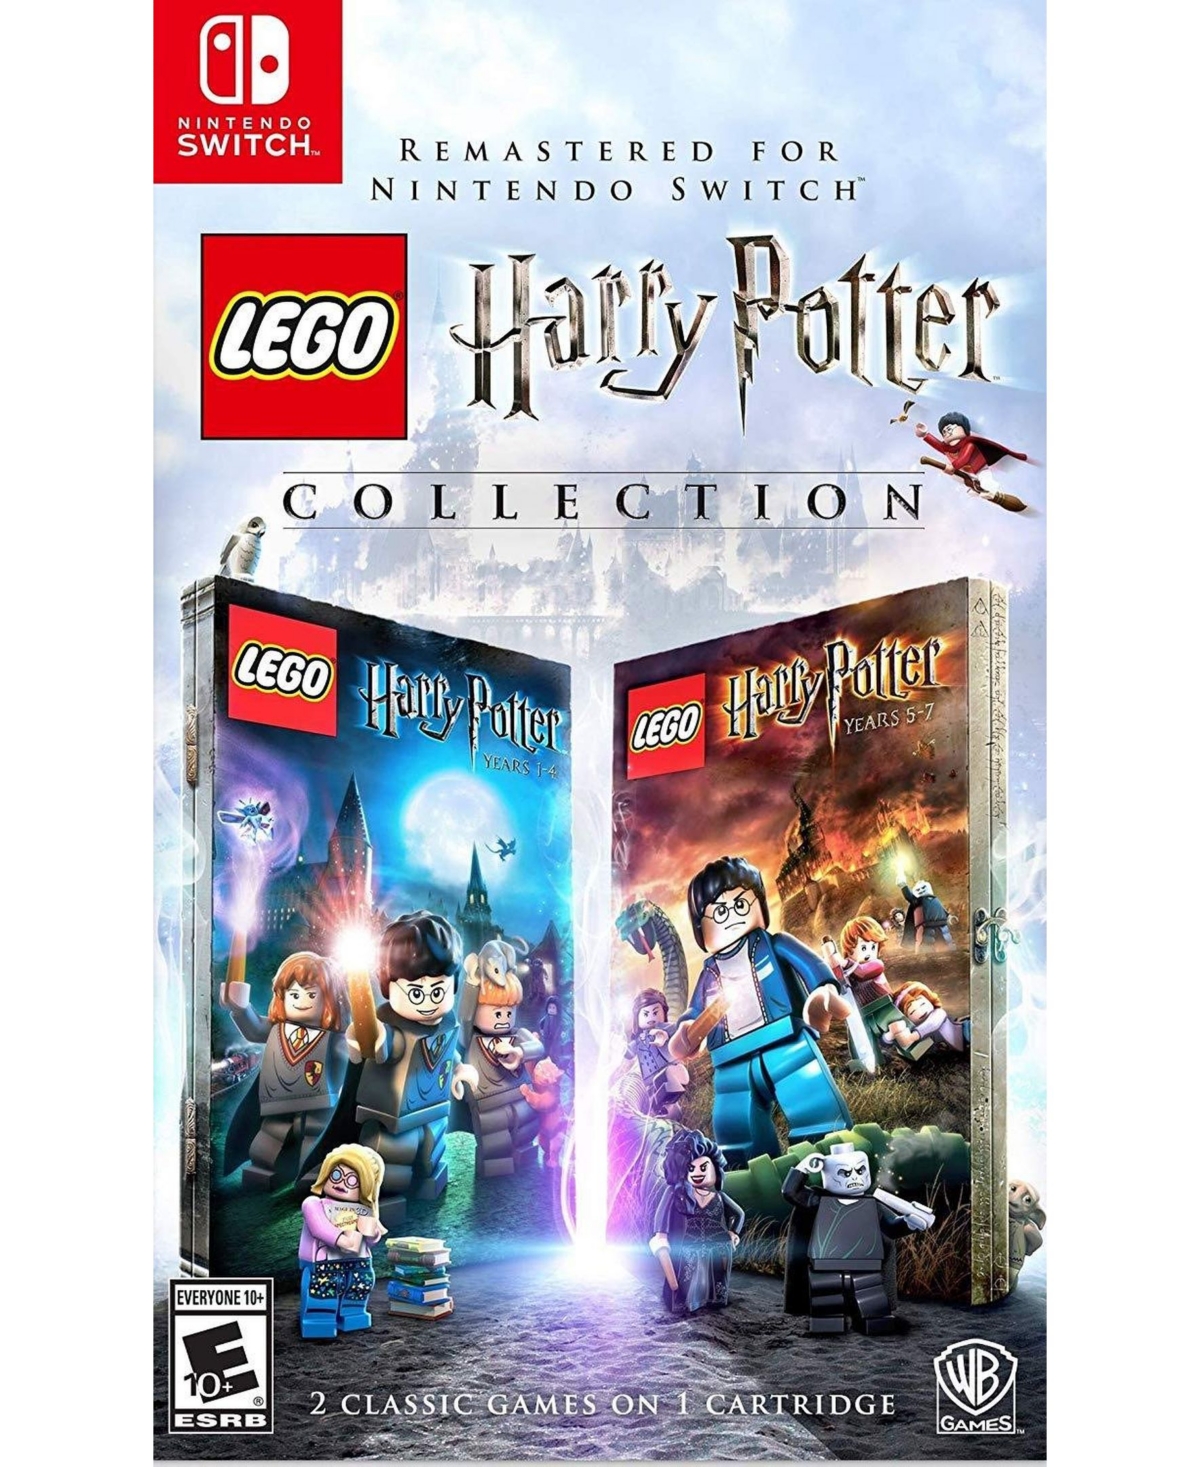 Nintendo Lego Harry Potter Collection - Switch